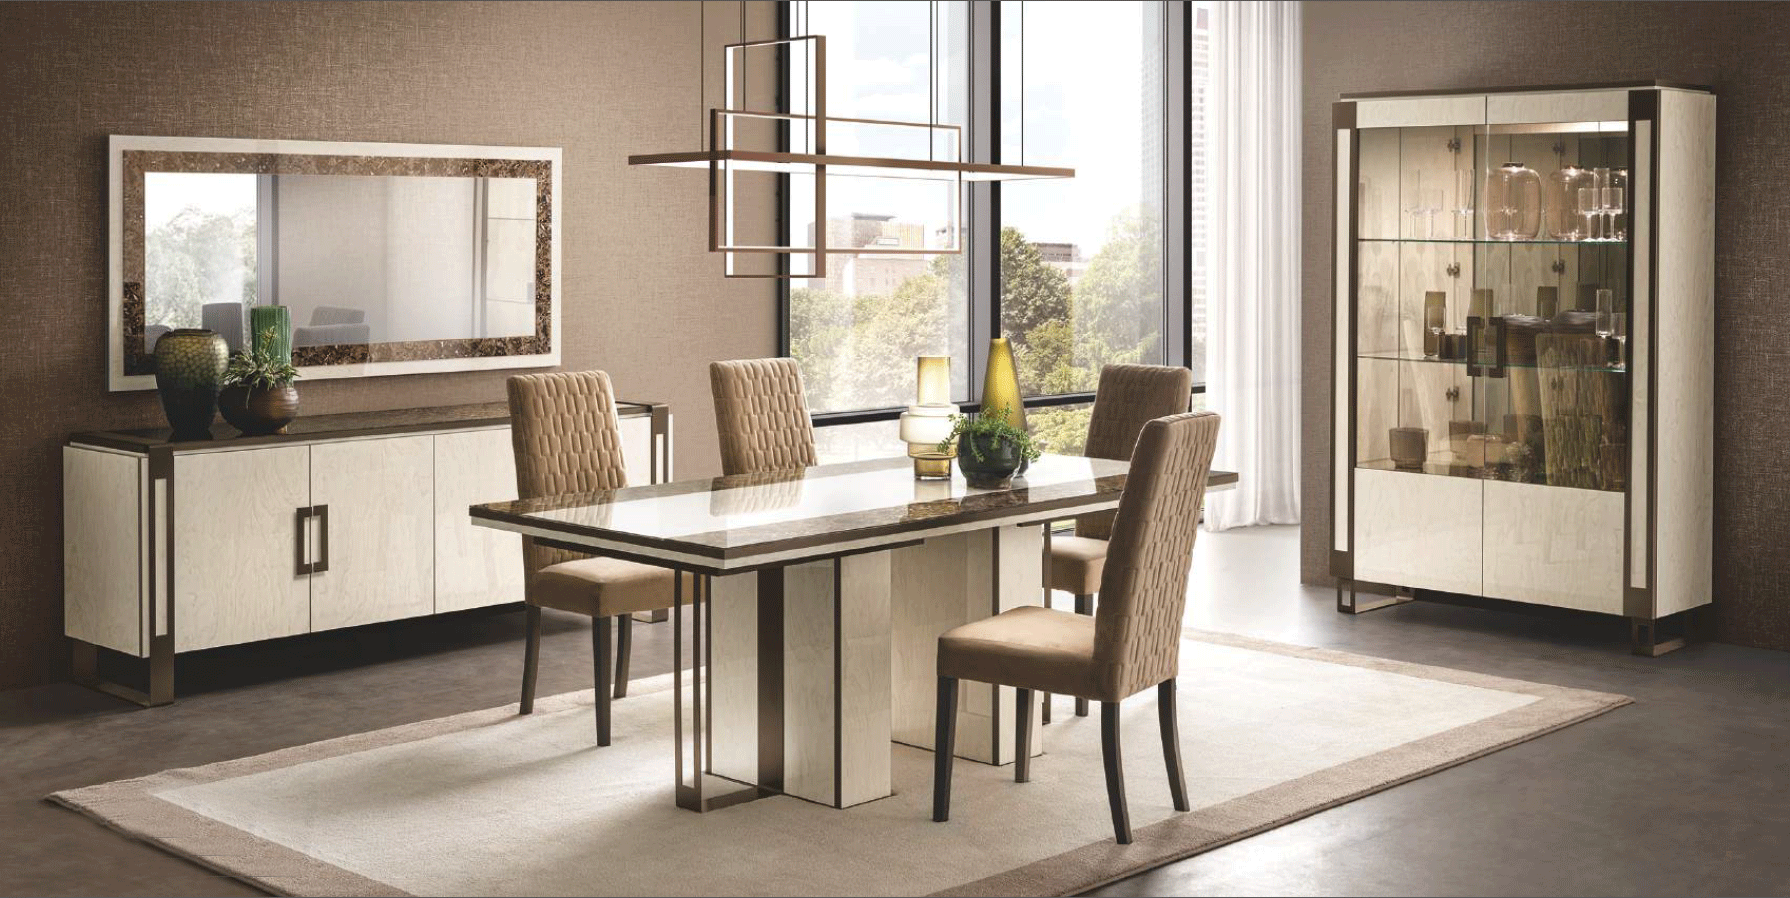 Dining Room Furniture Classic Dining Room Sets Poesia Dining room Additional items